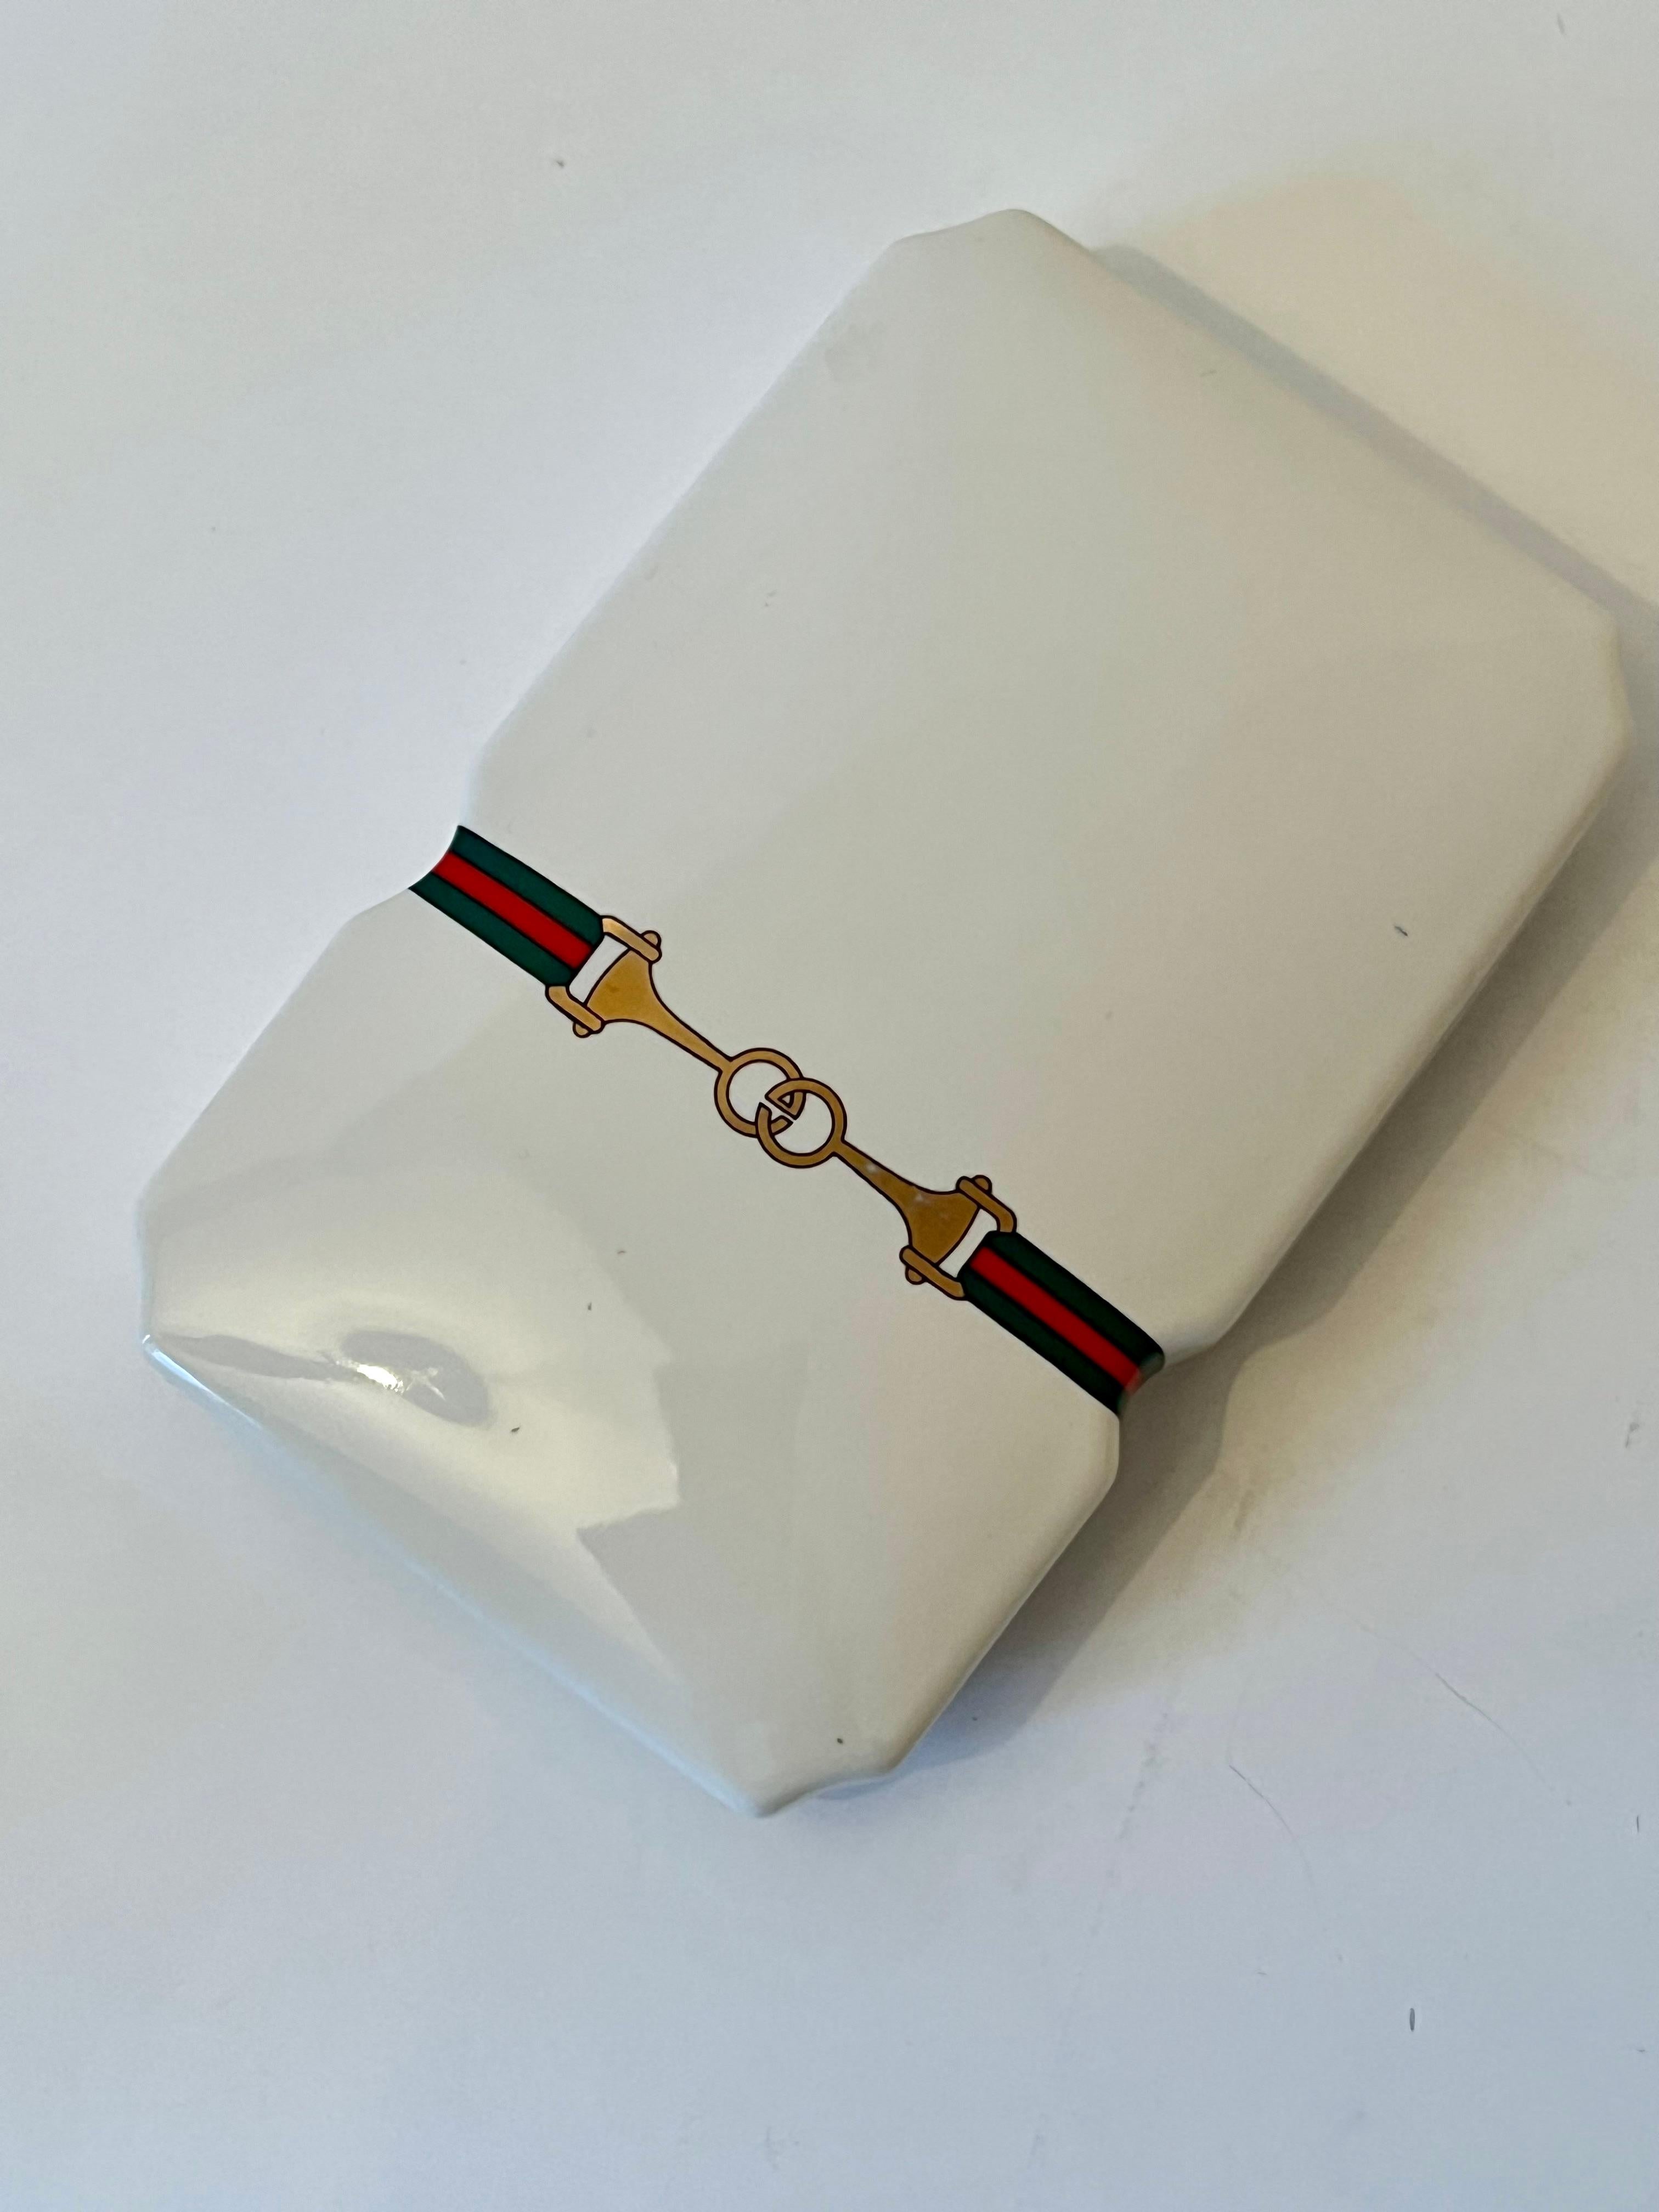 A wonderful porcelain box with the Gucci logo. Originally sold as a set for Incense, the holder is also included with some incense. We would suggest using this for a desk accessory, or for 420 incense!

Sophisticated and elegant, a compliment to